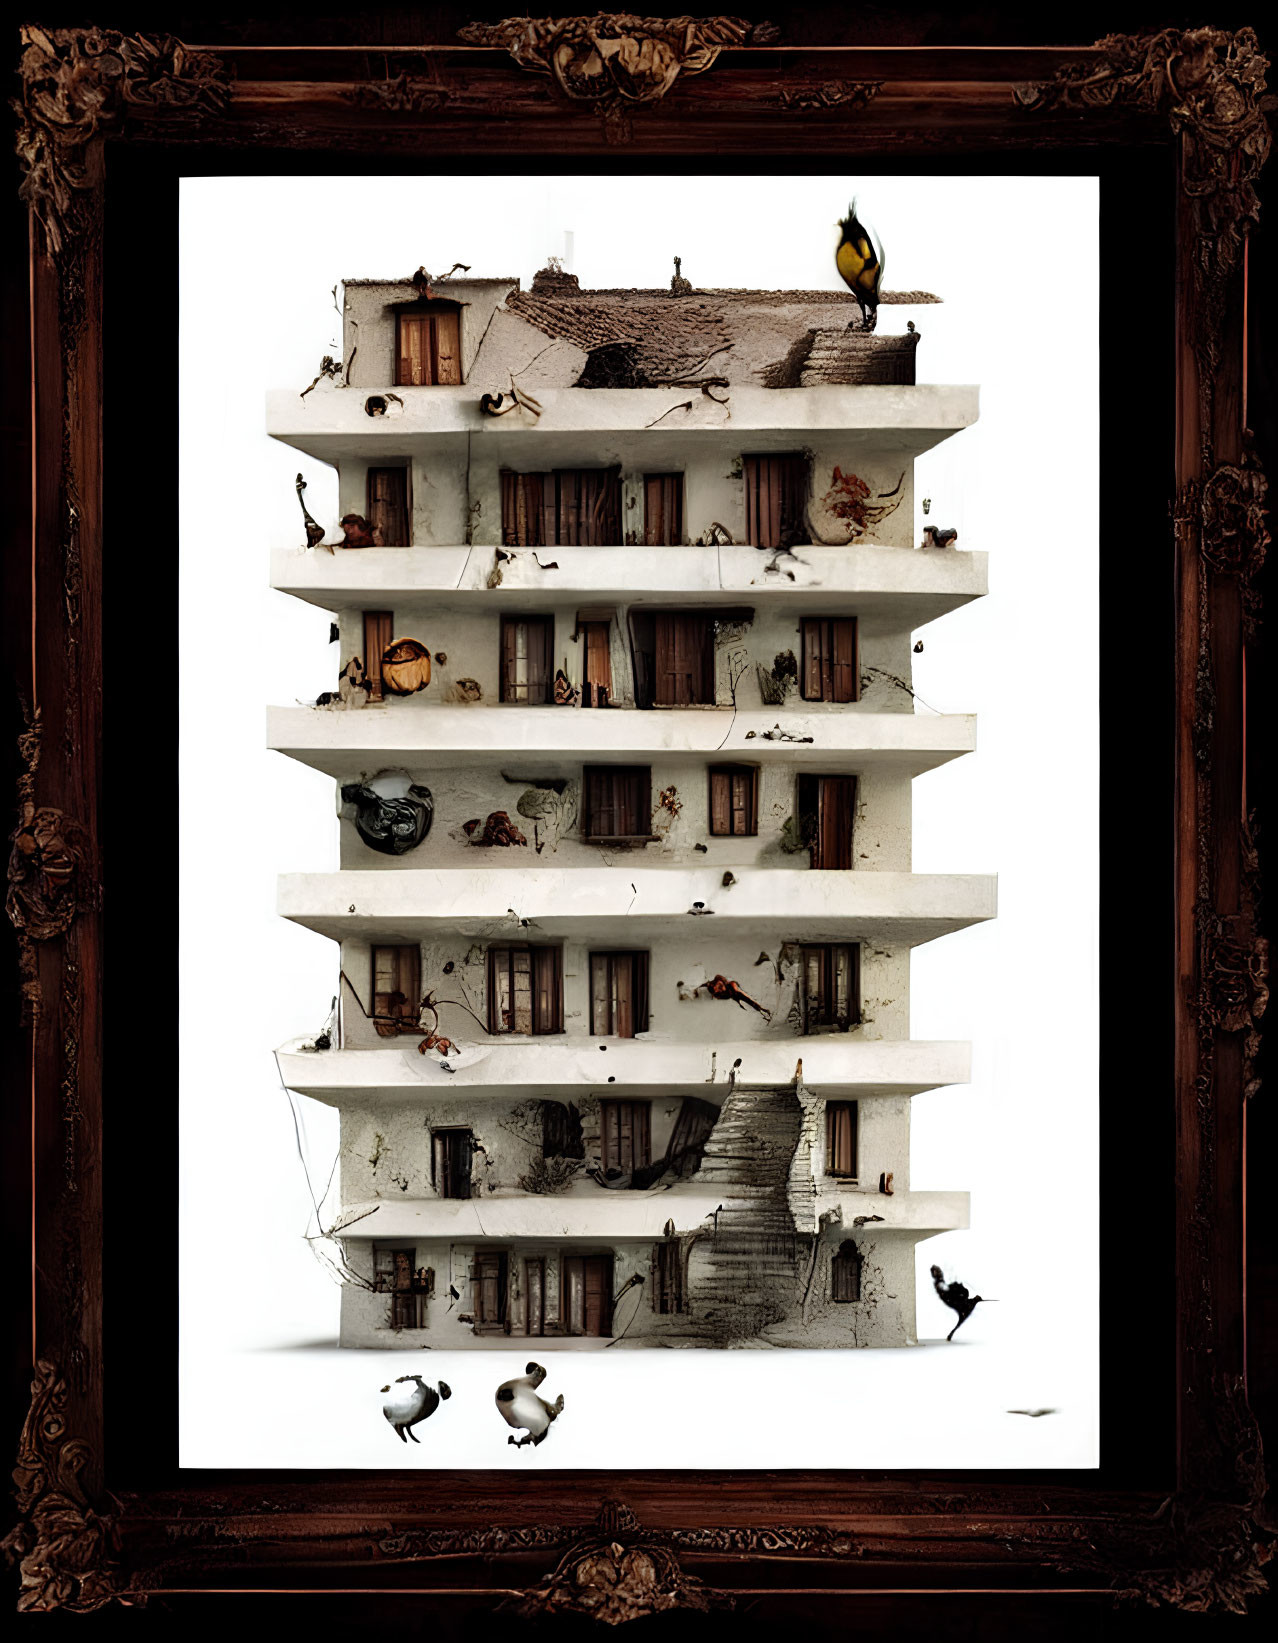 Whimsical layered building with surreal elements and animals in ornate frame